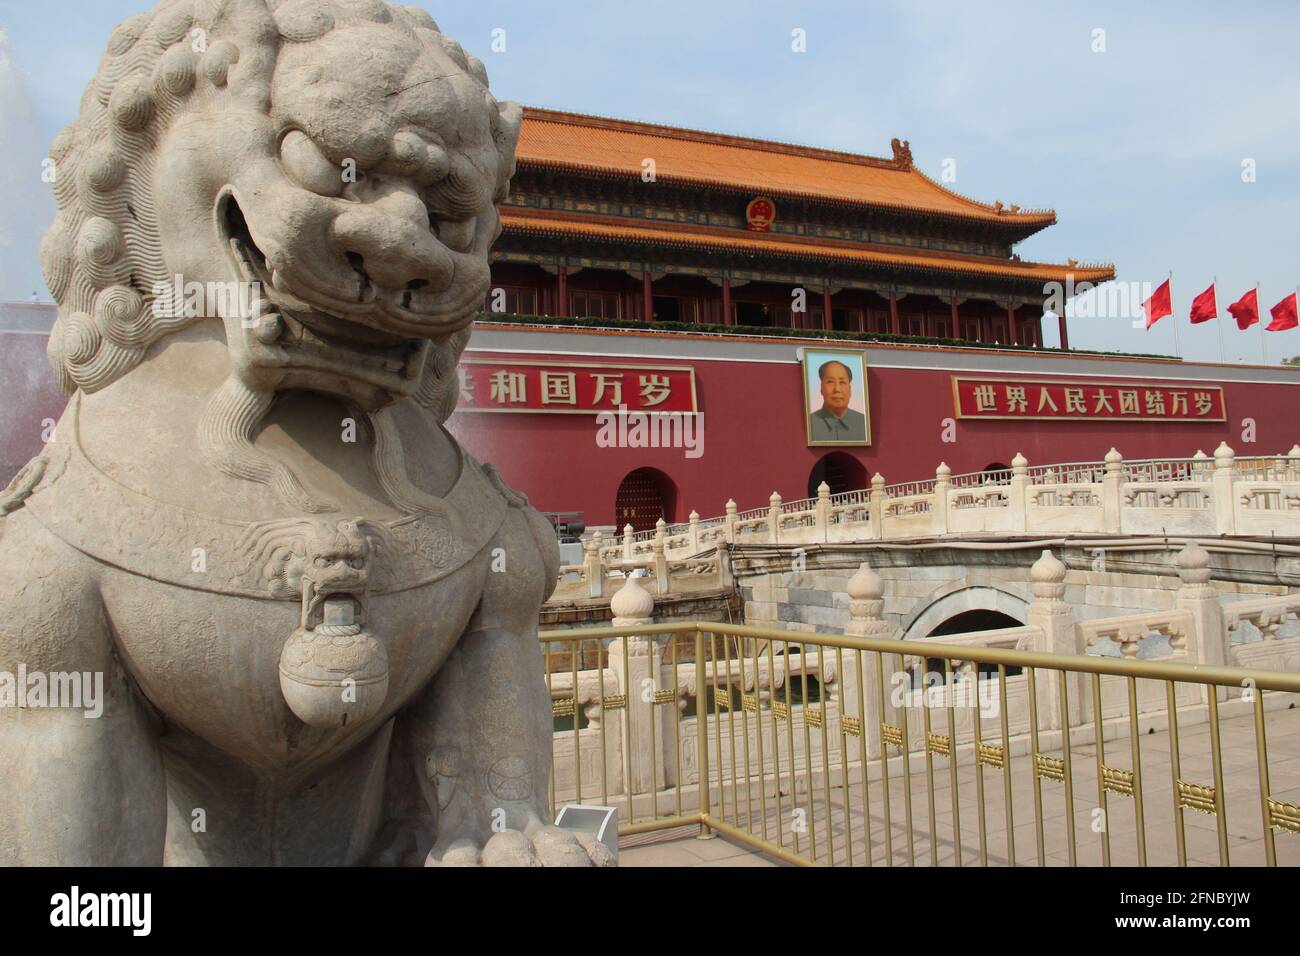 A dragon statue outside the Tiananmen Gate in Beijing, China Stock Photo